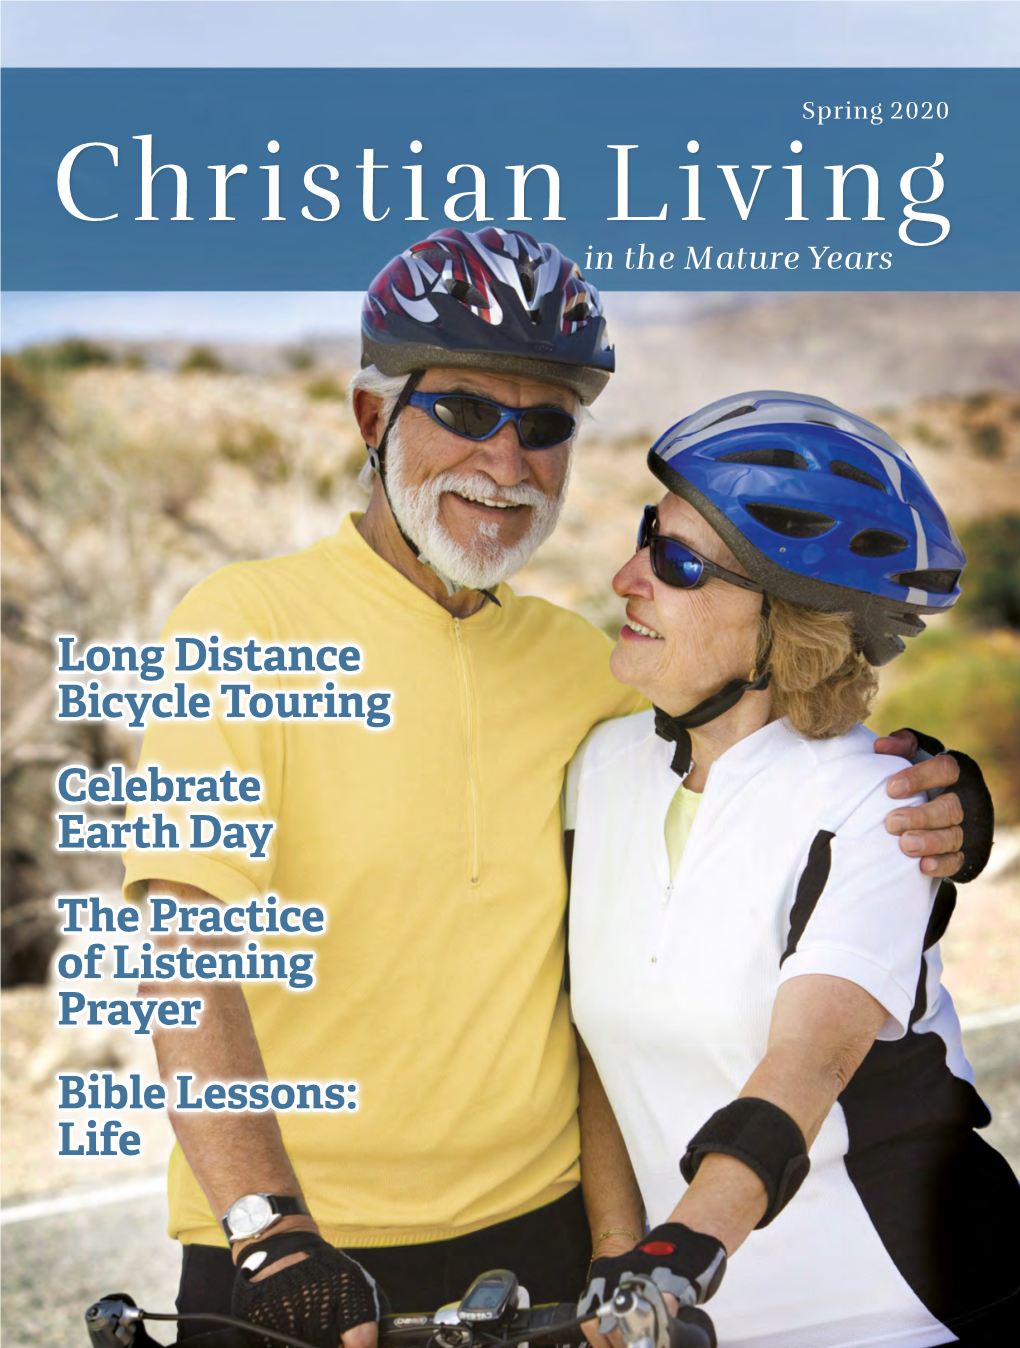 CHRISTIAN LIVING in the MATURE YEARS (ISSN 2639-8931) Is Published Quarterly by Abingdon Press, 2222 Rosa L